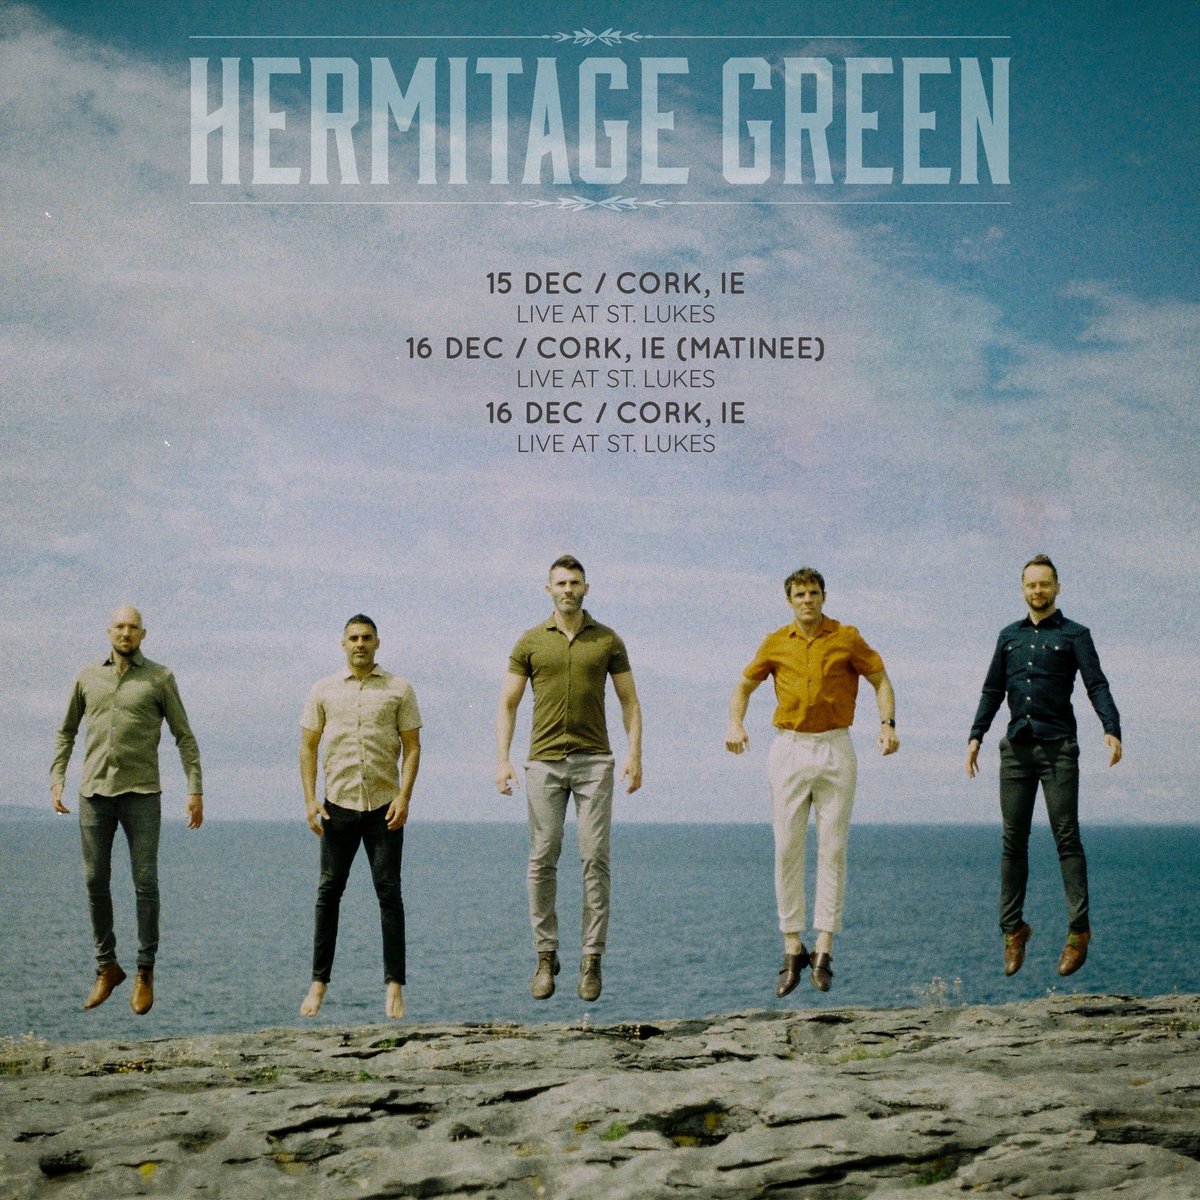 ANNOUNCING 🌟 Hermitage Green 🌟 Playing 3 special shows this December 15th + 16th. Tickets go on sale Friday August 25th at 9am @HermitageGreen